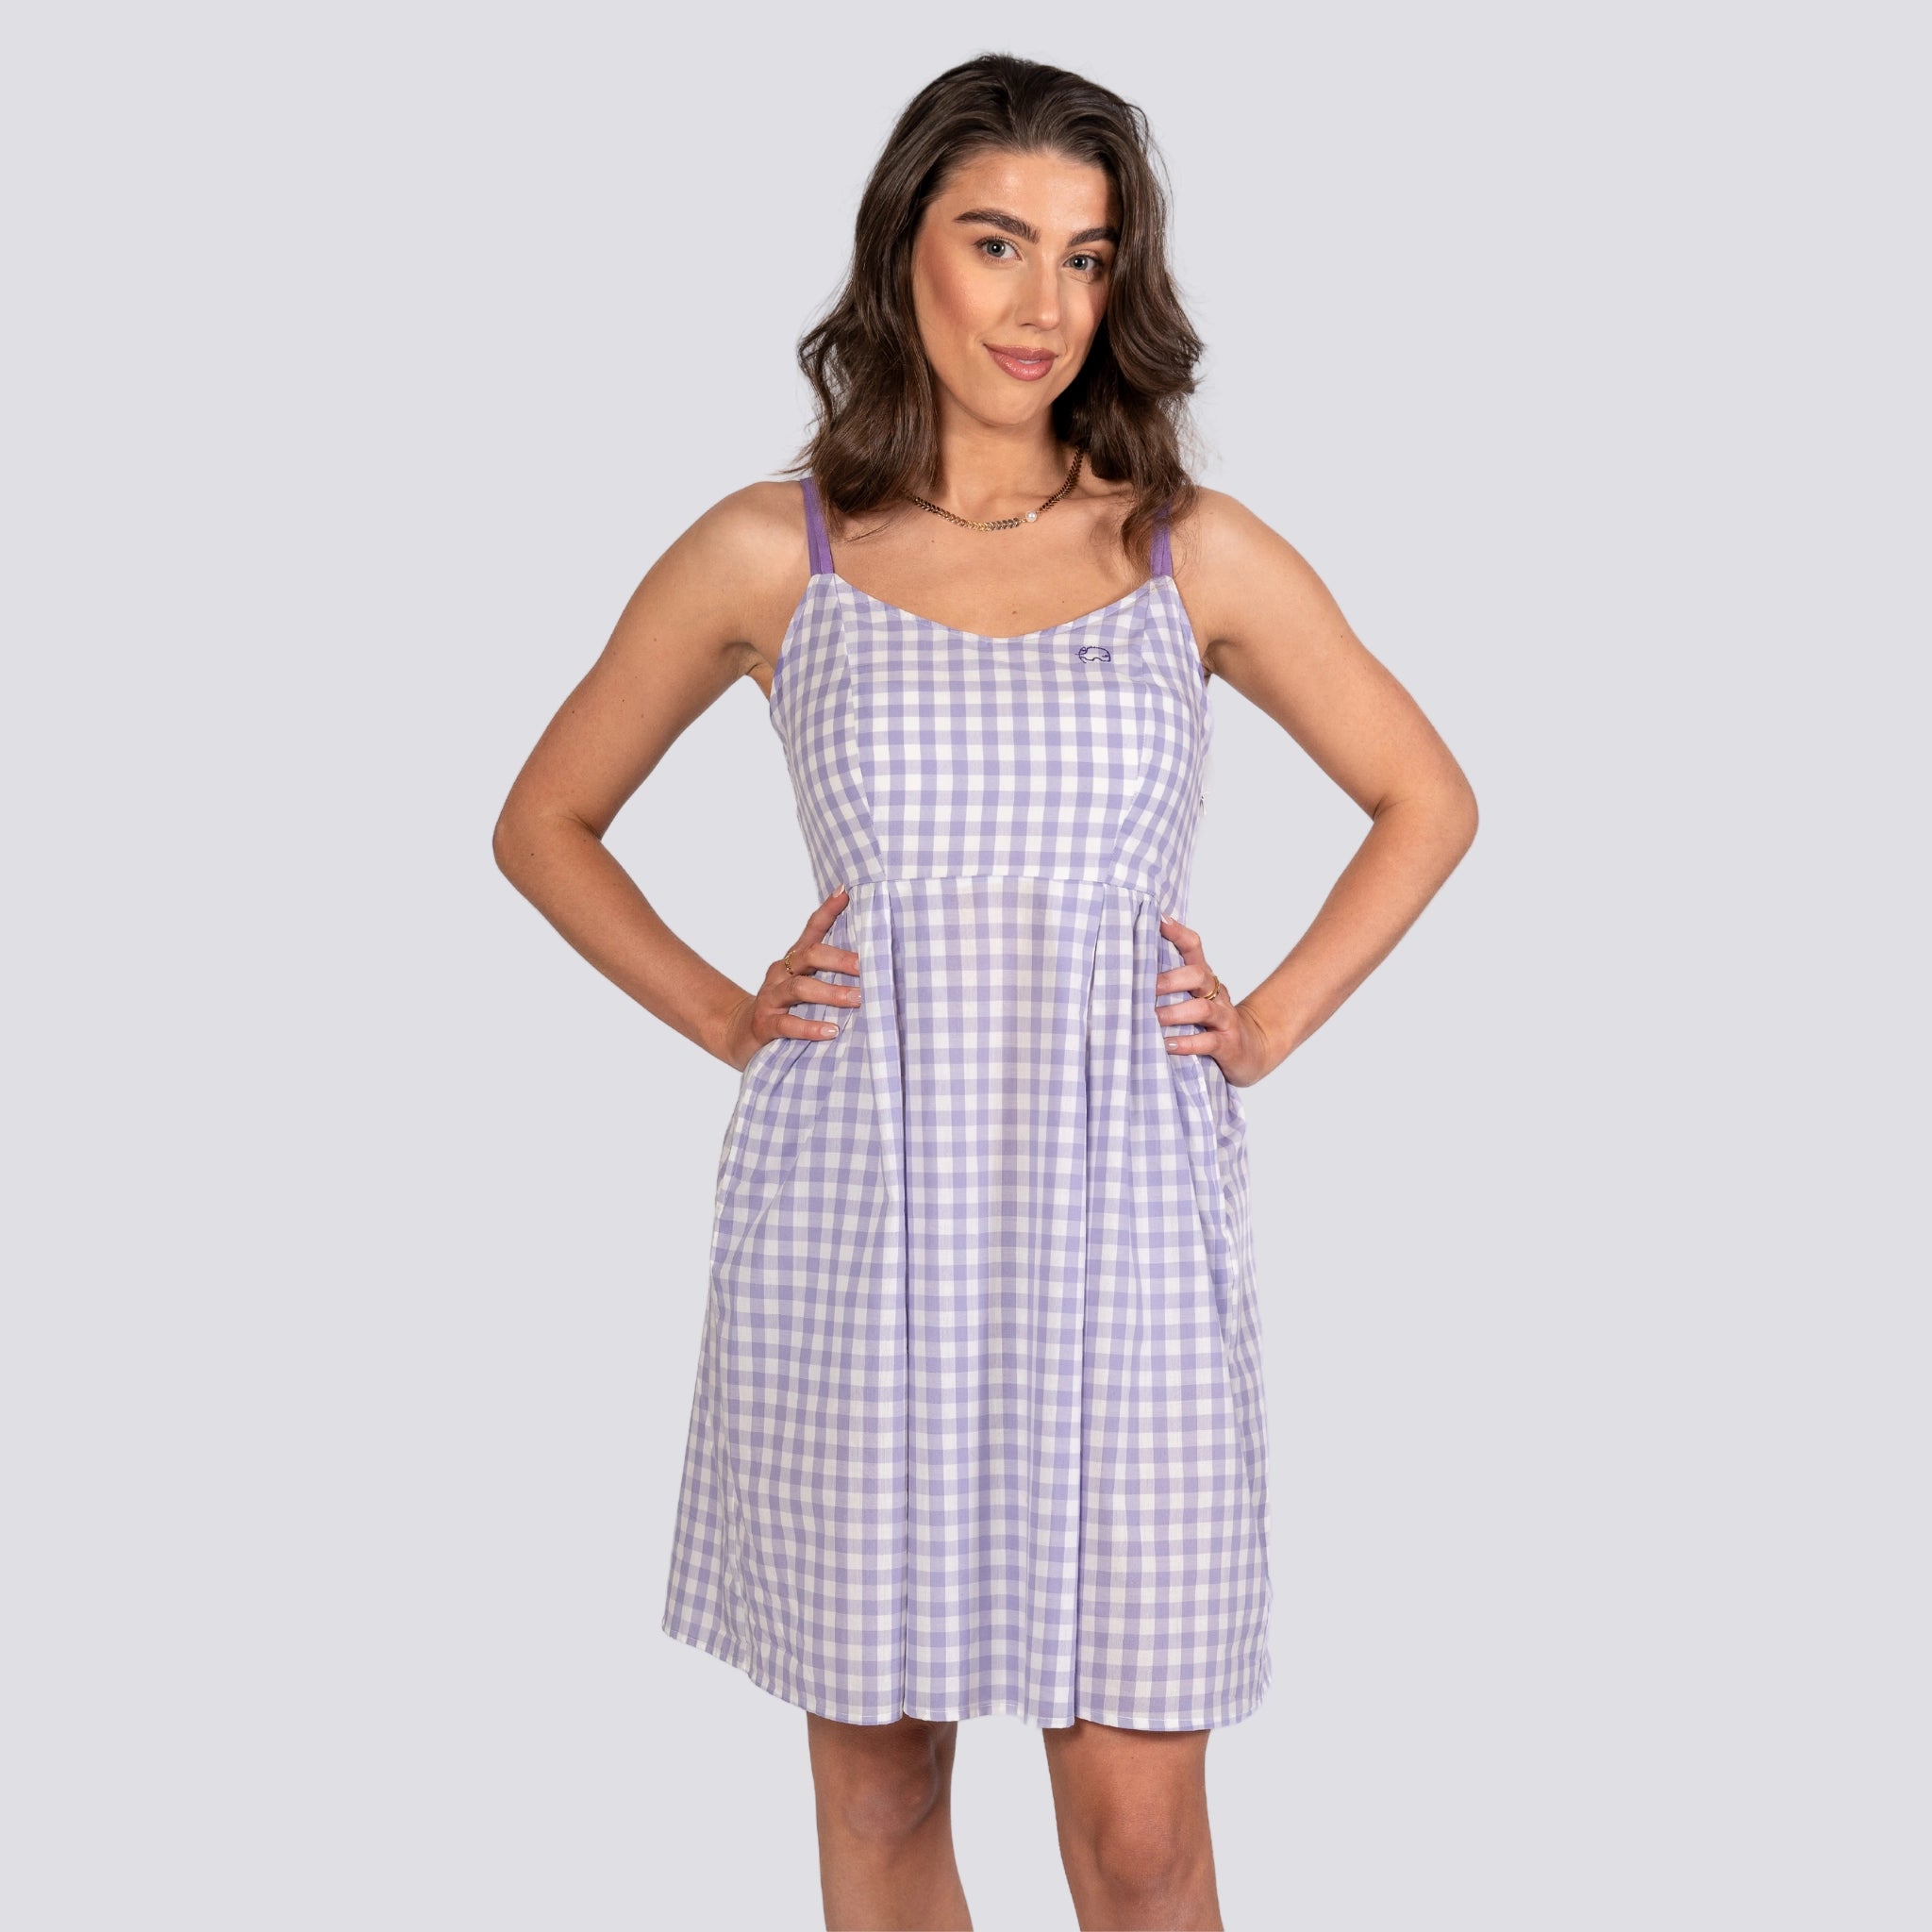 A woman in a Karee Lavender Plaid Cotton Mini Dress stands with hands on her hips, posing against a gray background.